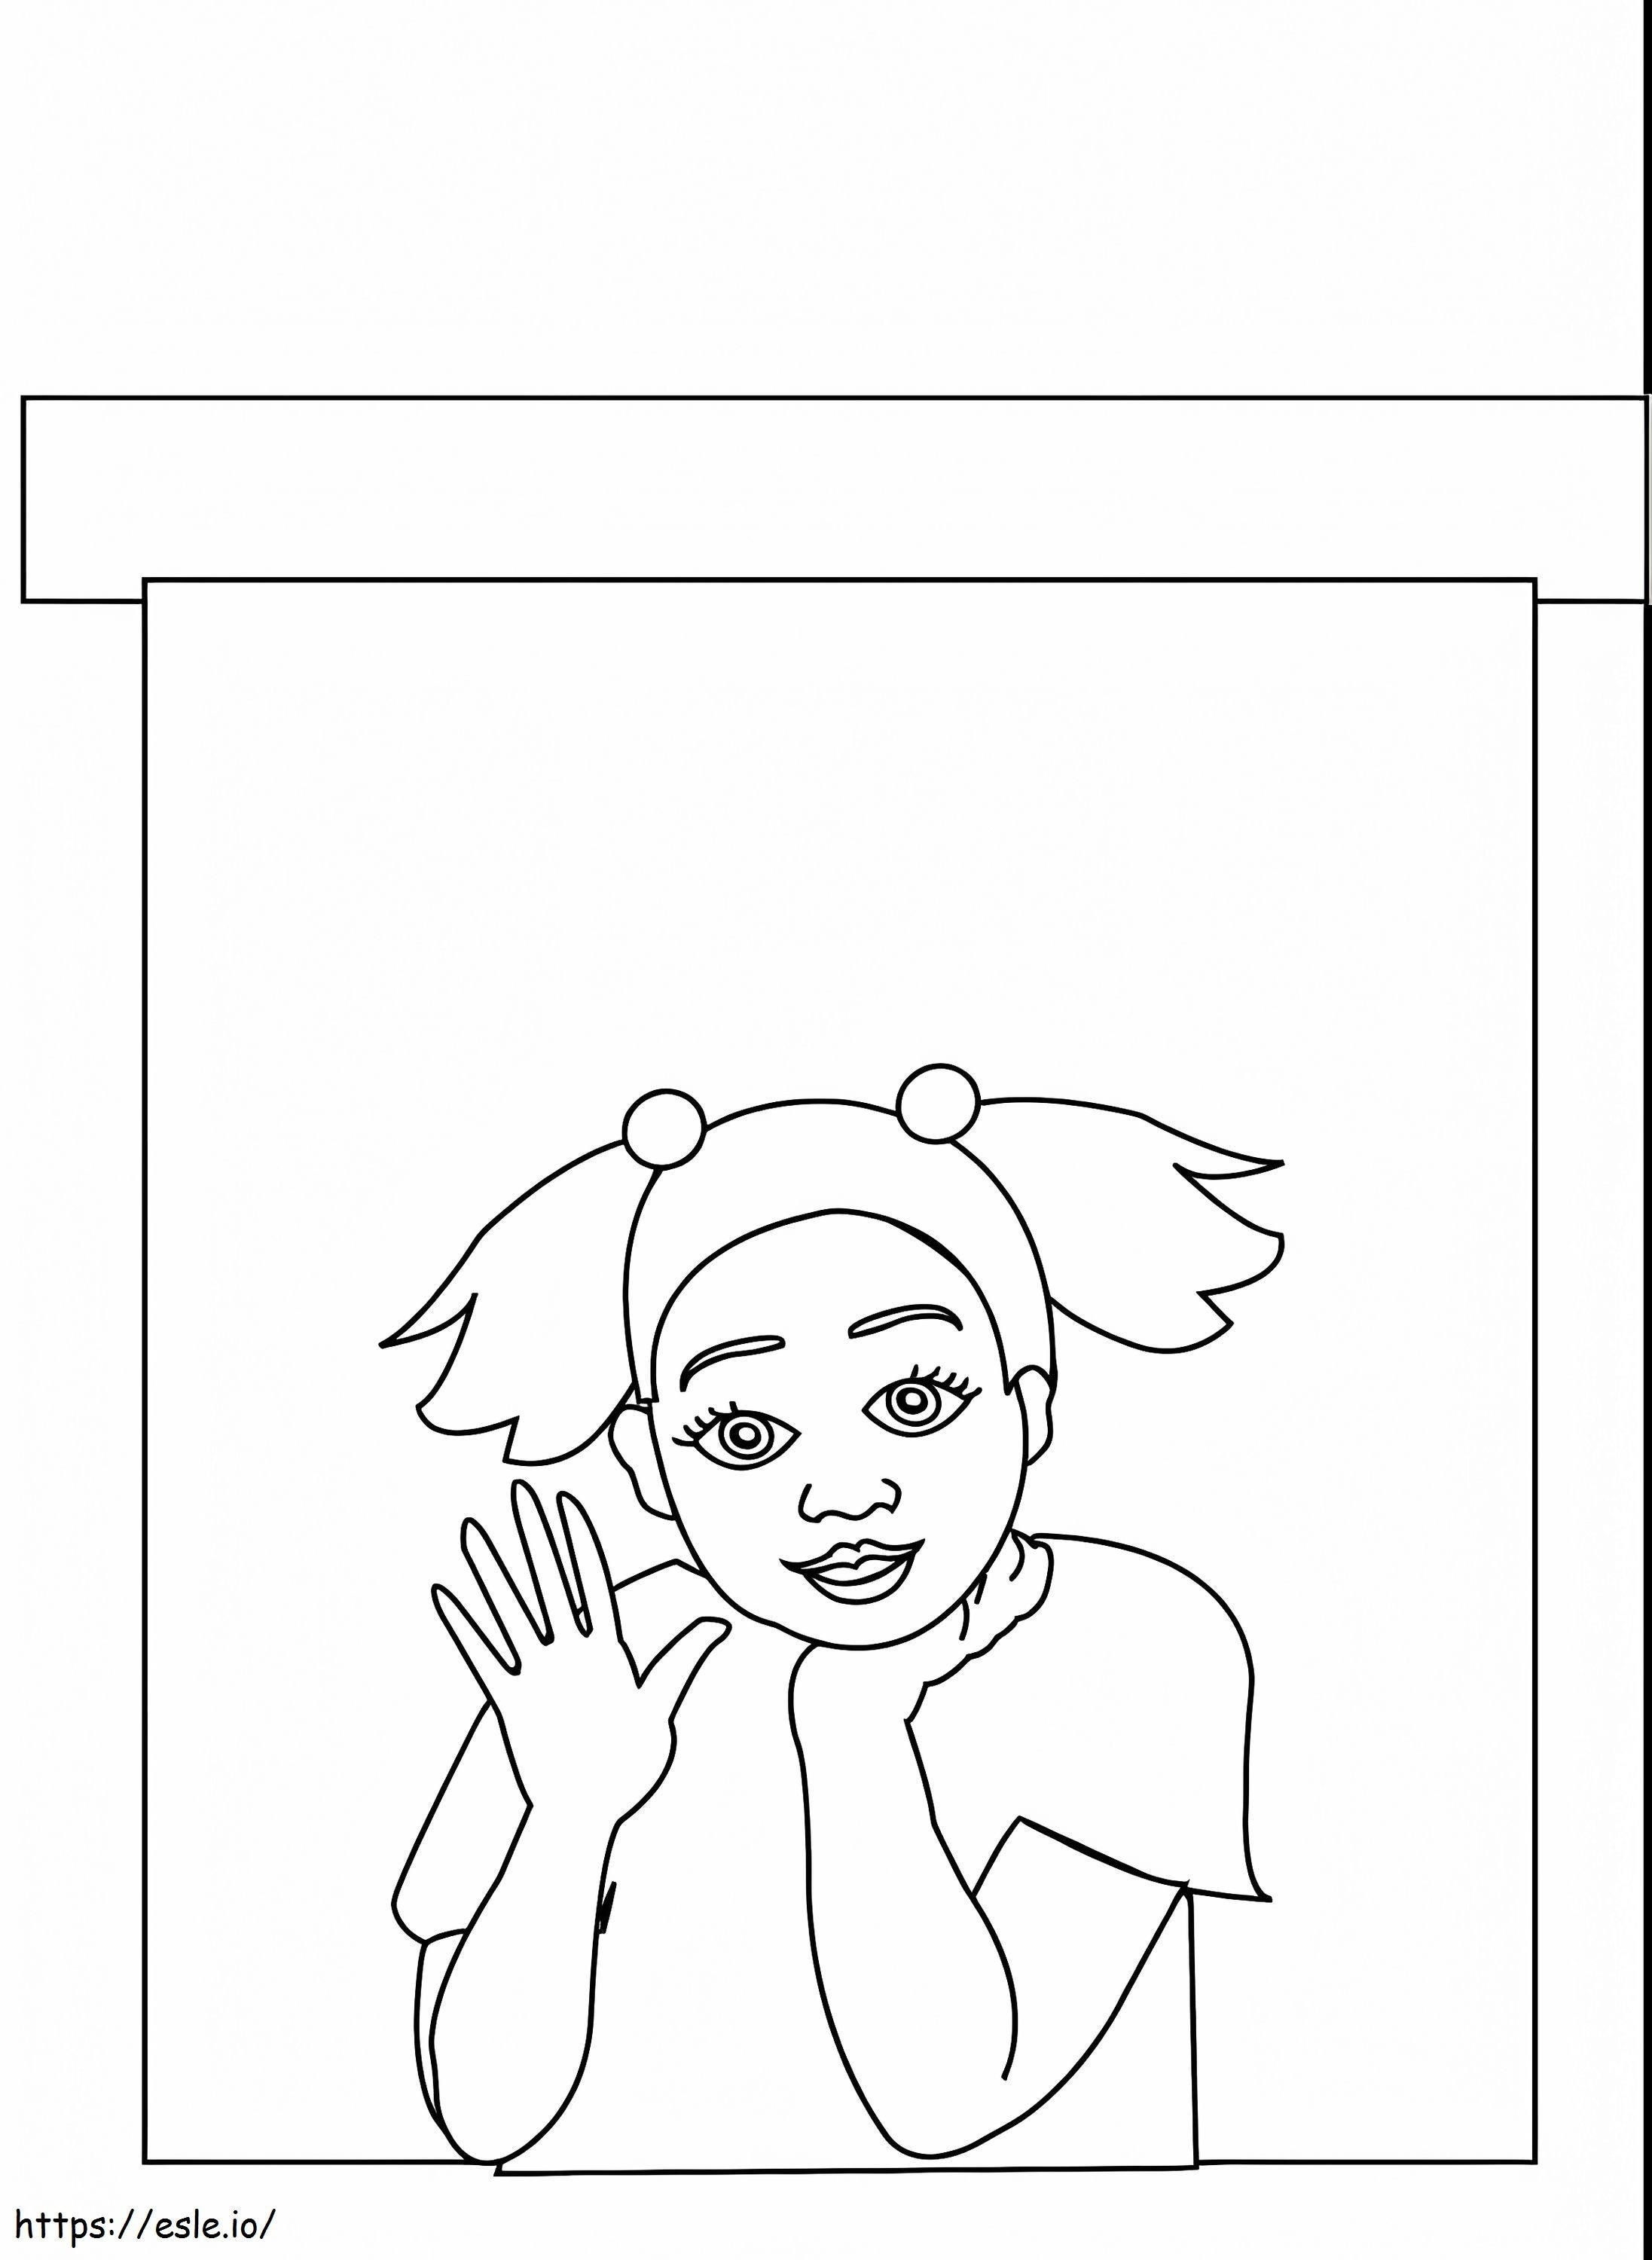 Looking Out Window coloring page